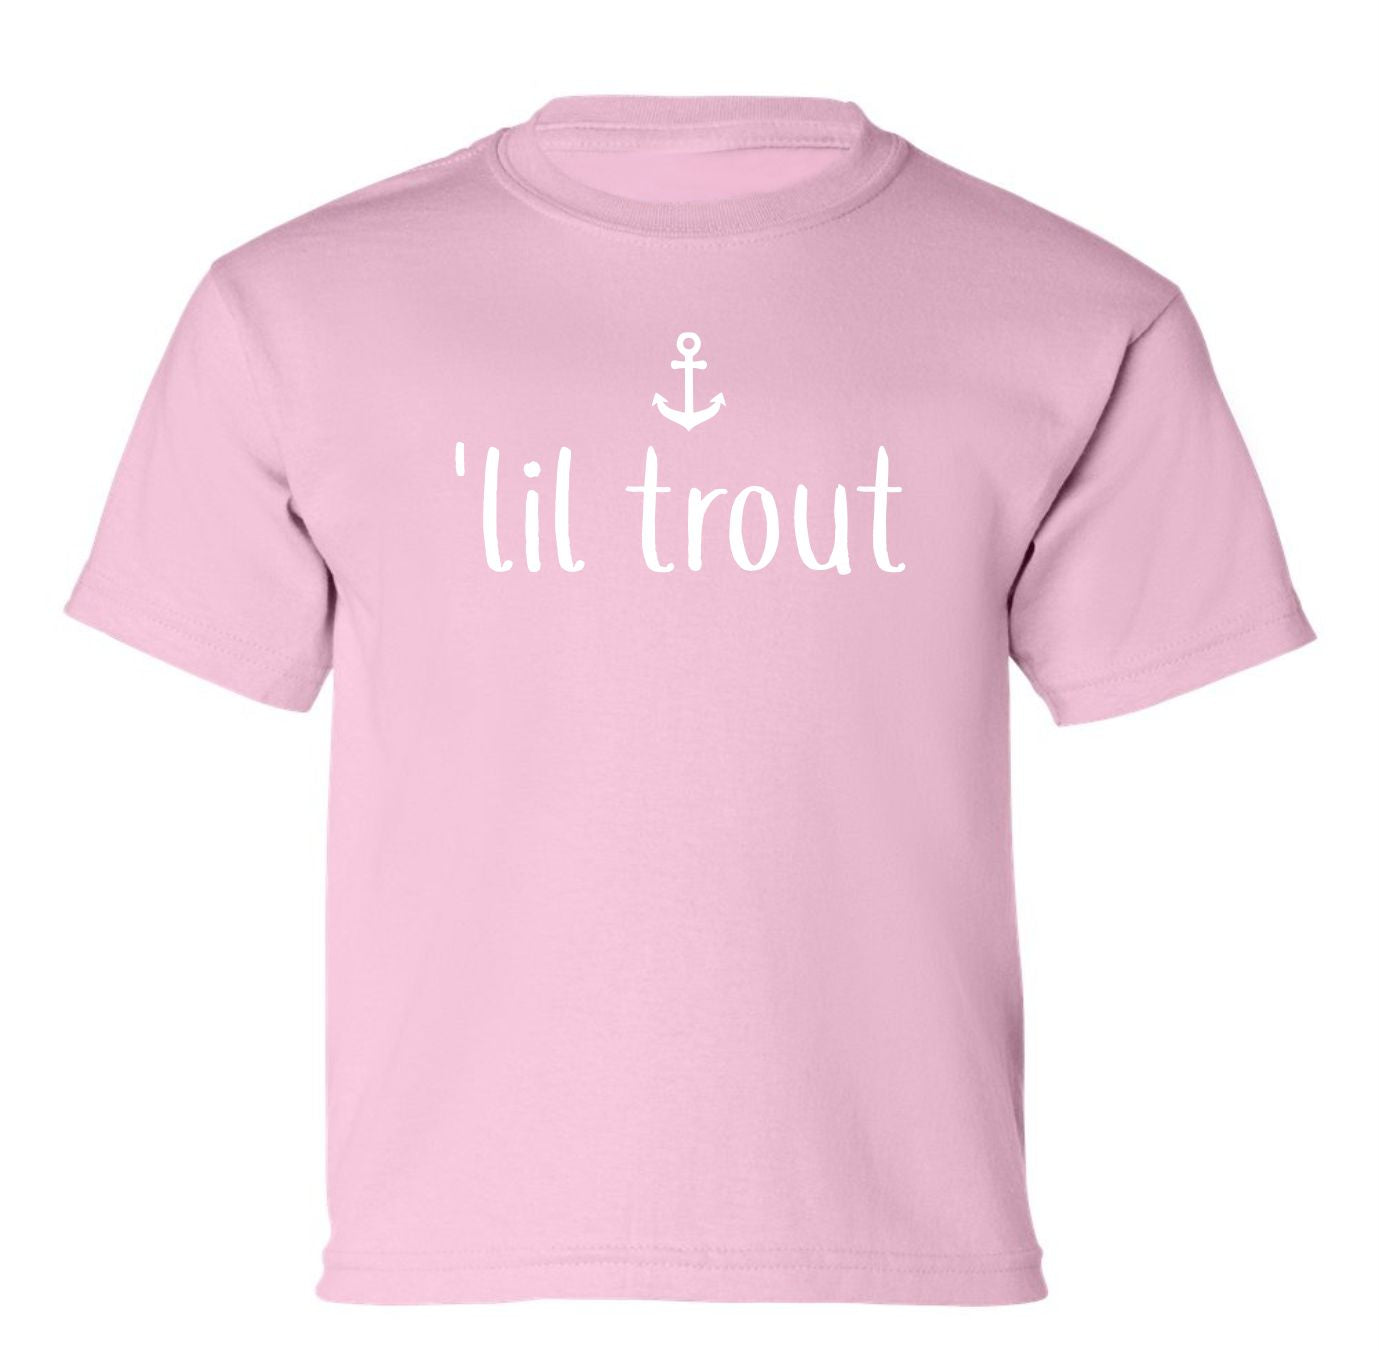 Lil Trout Toddler/Youth T-Shirt Pink / 5T